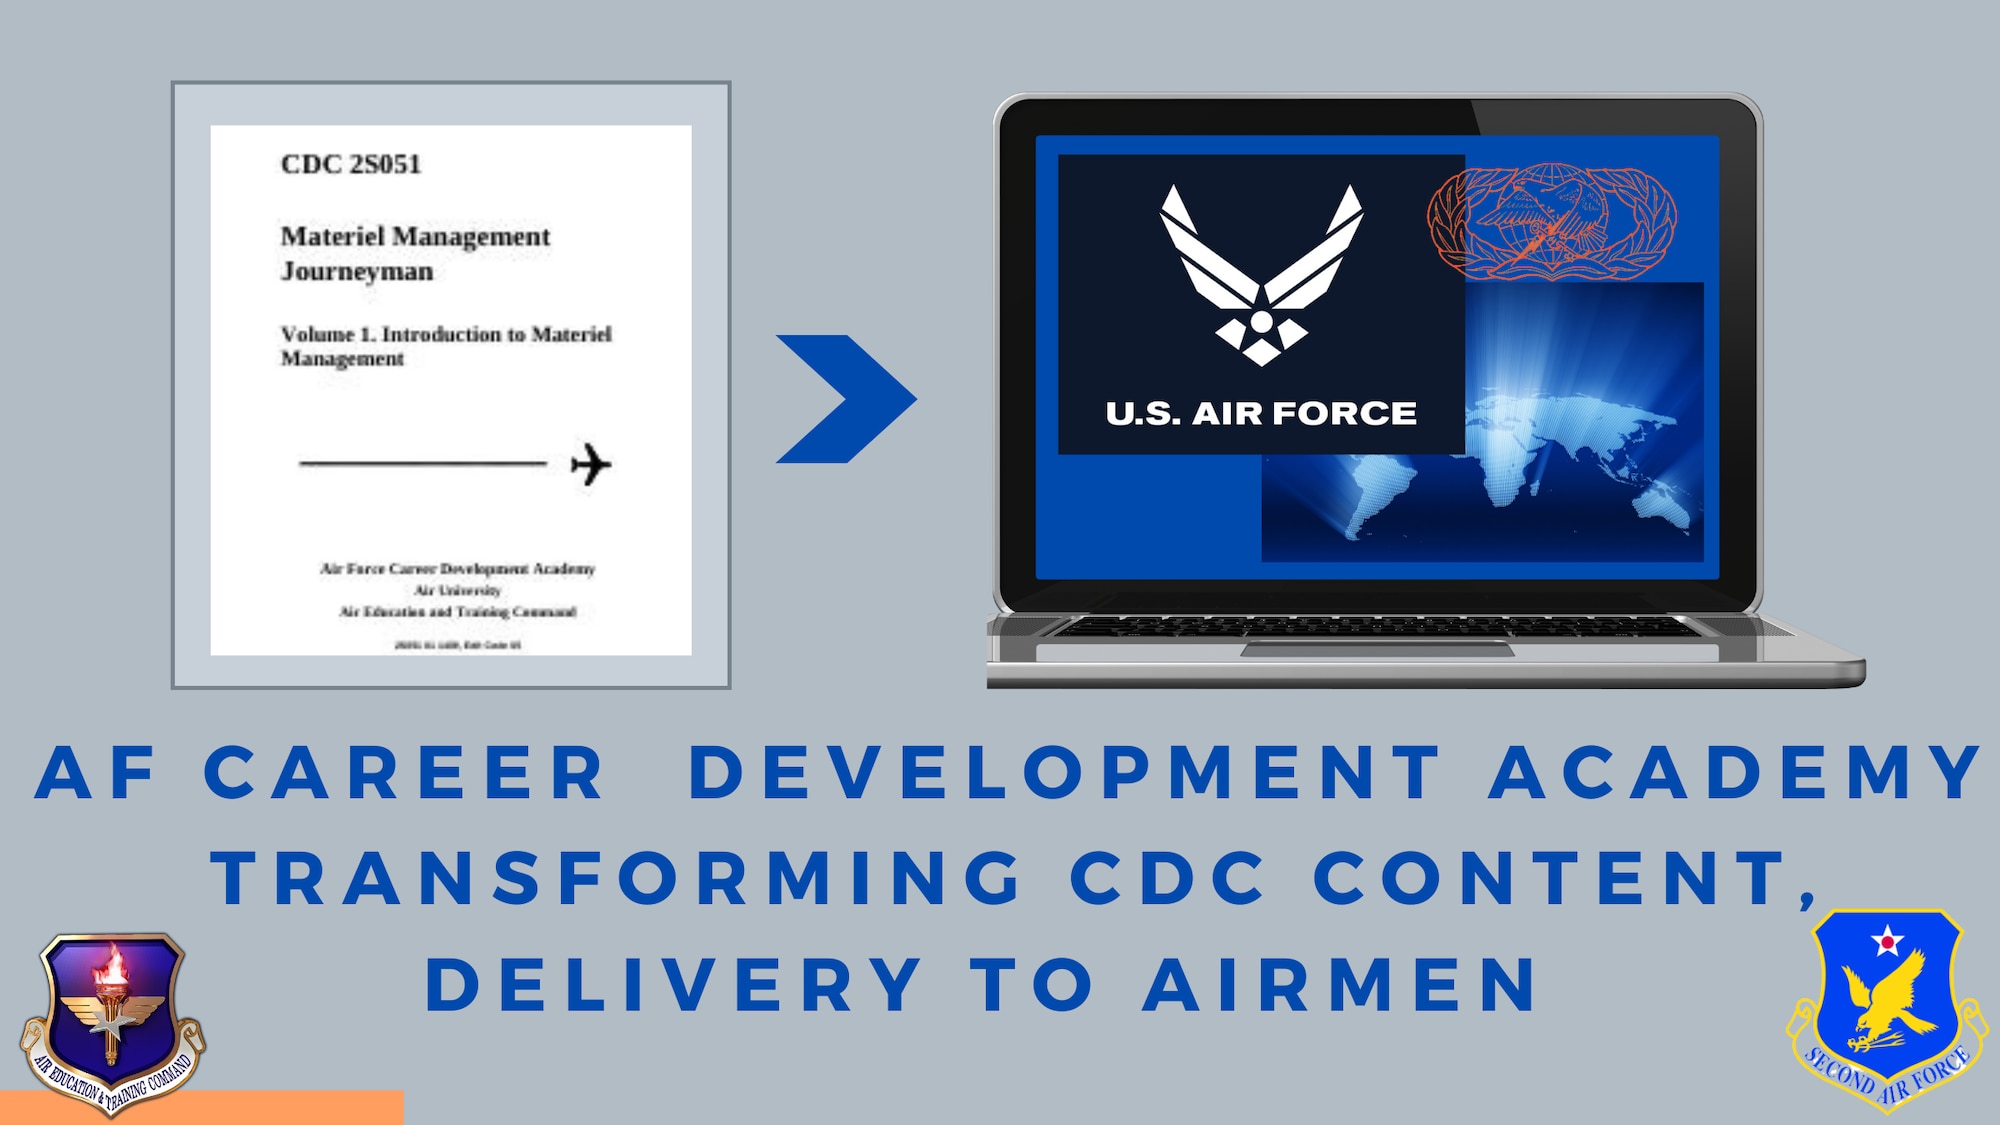 snapshot of legacy paper CDCs and then computer screen with world map and U.S. Air Force logo